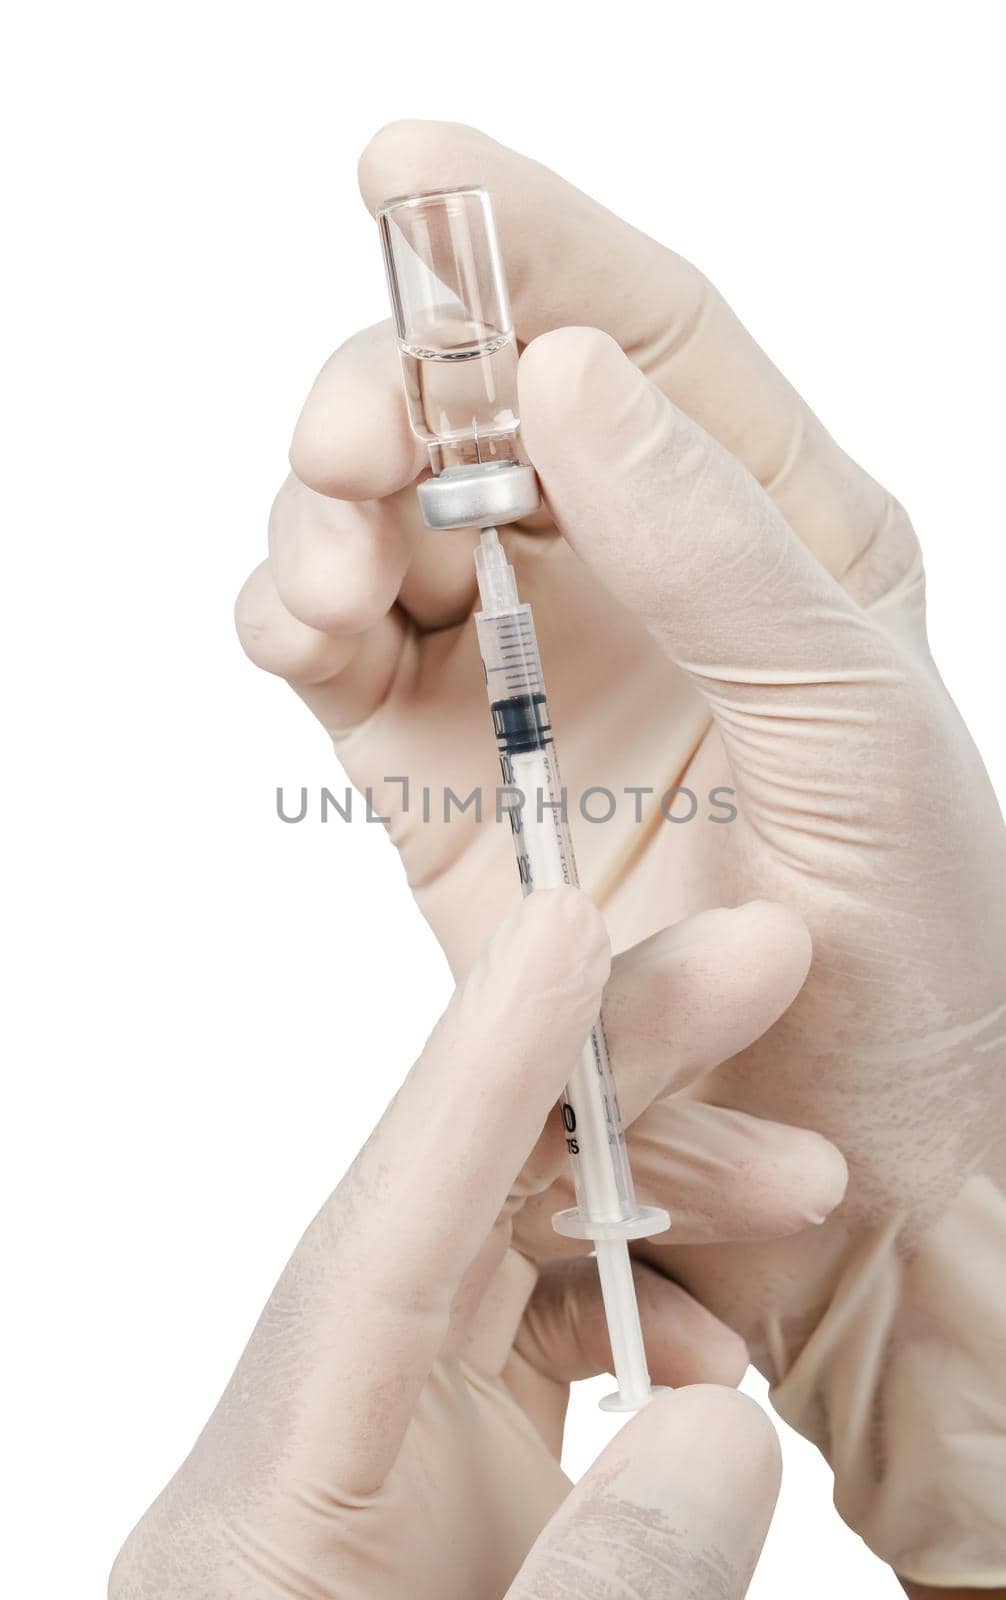 Syringe, medical injection vaccination in hand with glove isolated on white background, Save clipping path.